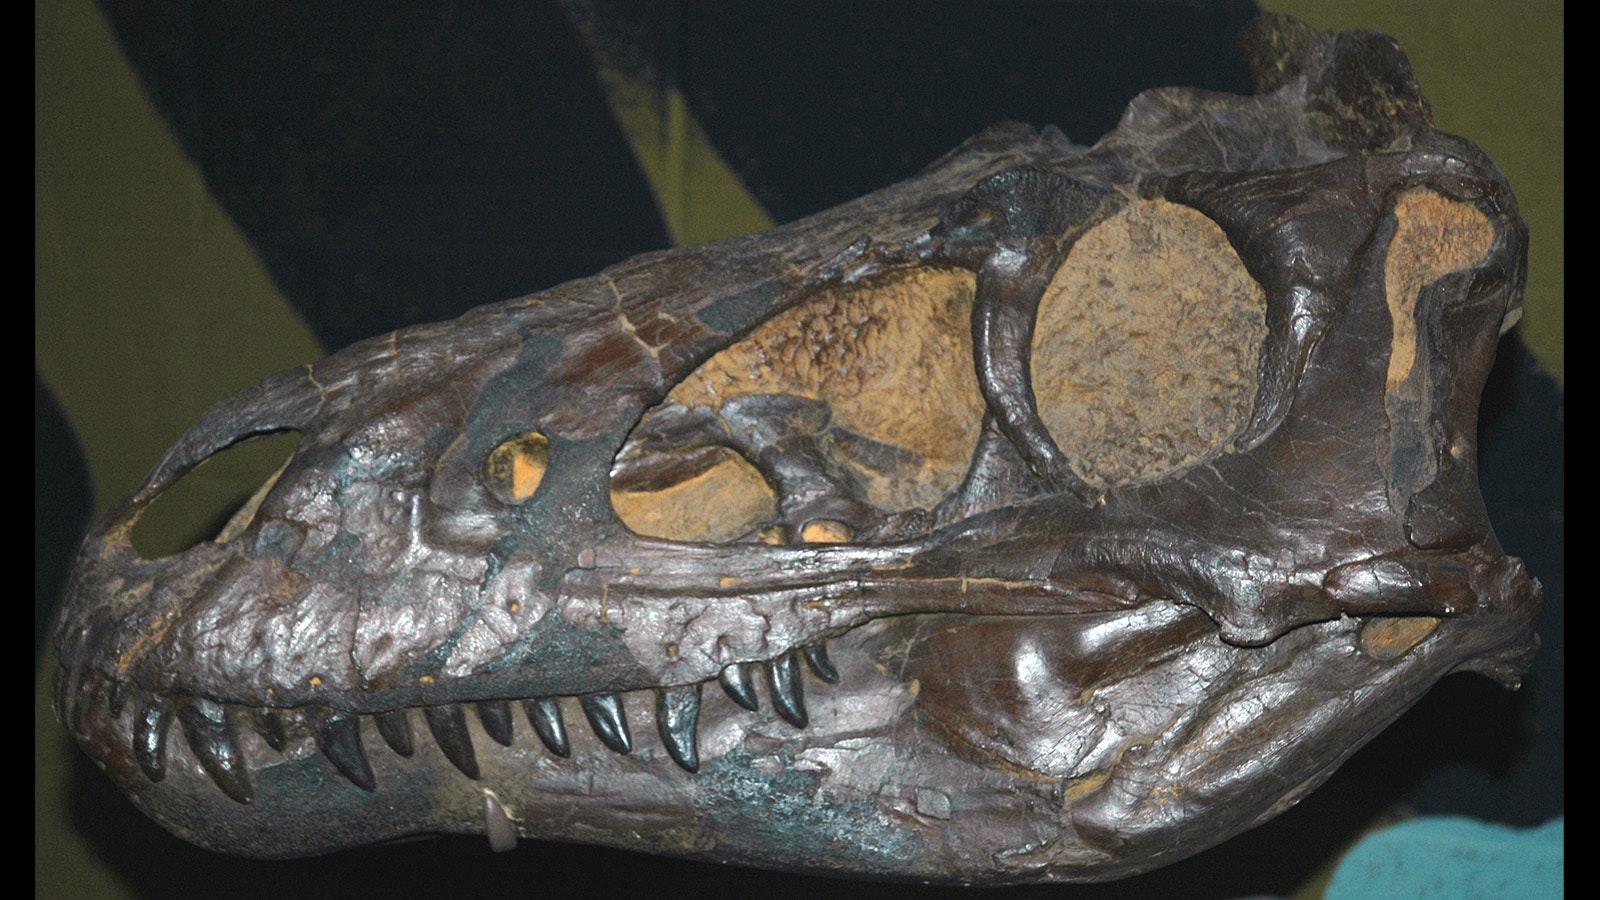 This Nanotyrannus lancensis theropod dinosaur skull from the Cretaceous of Montana is displayed at the Cleveland Museum of Natural History in Ohio.